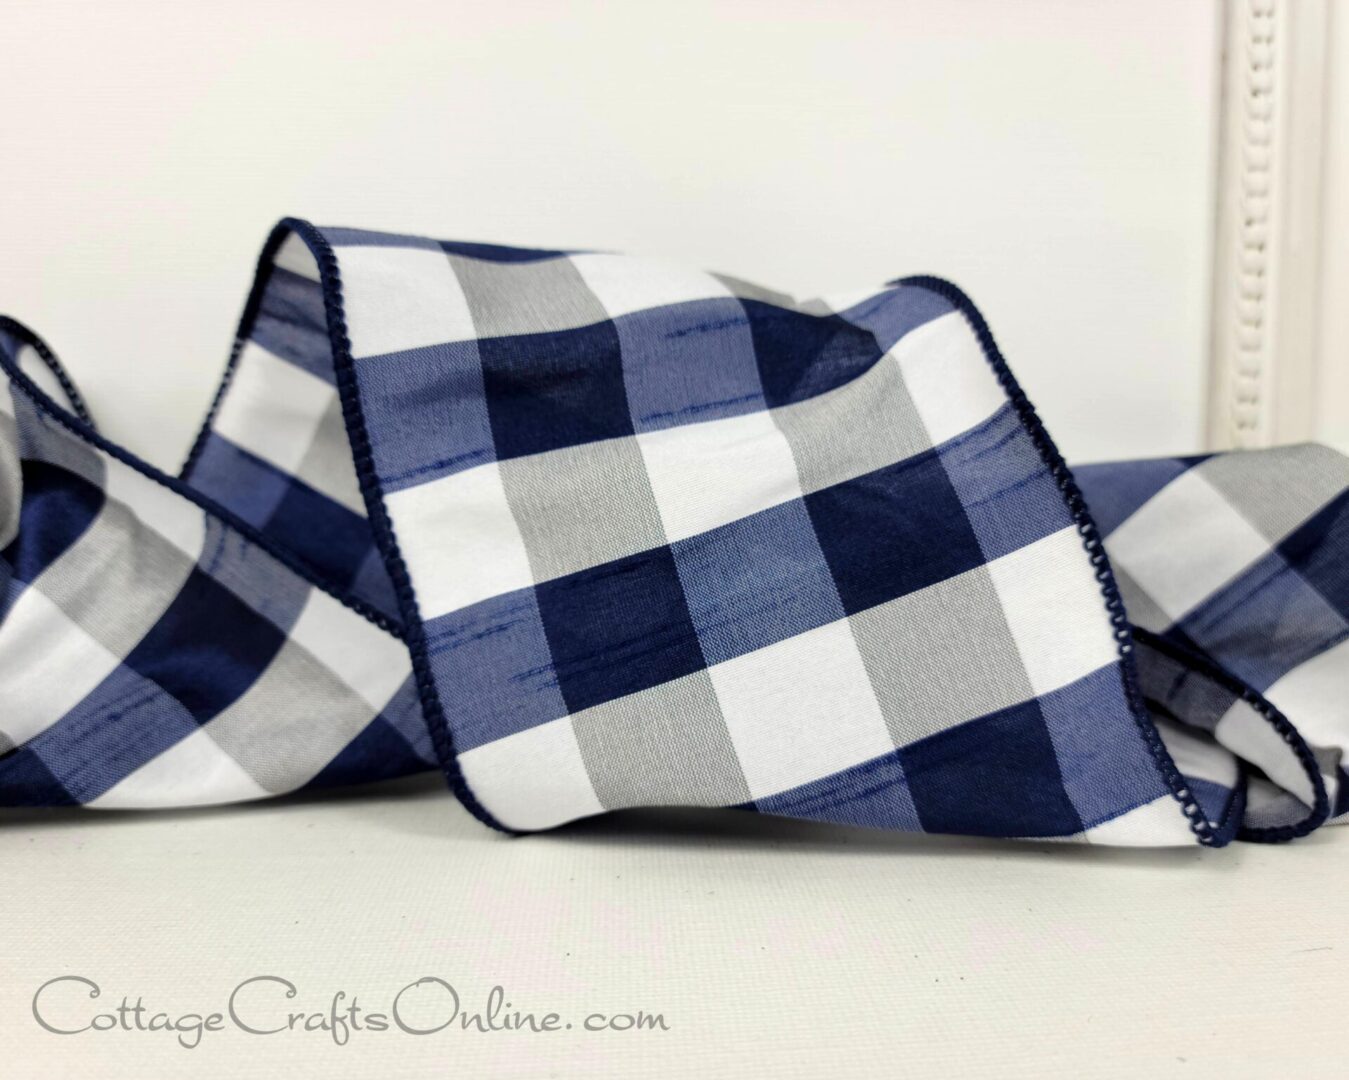 A blue and white checkered cloth sitting on top of a table.